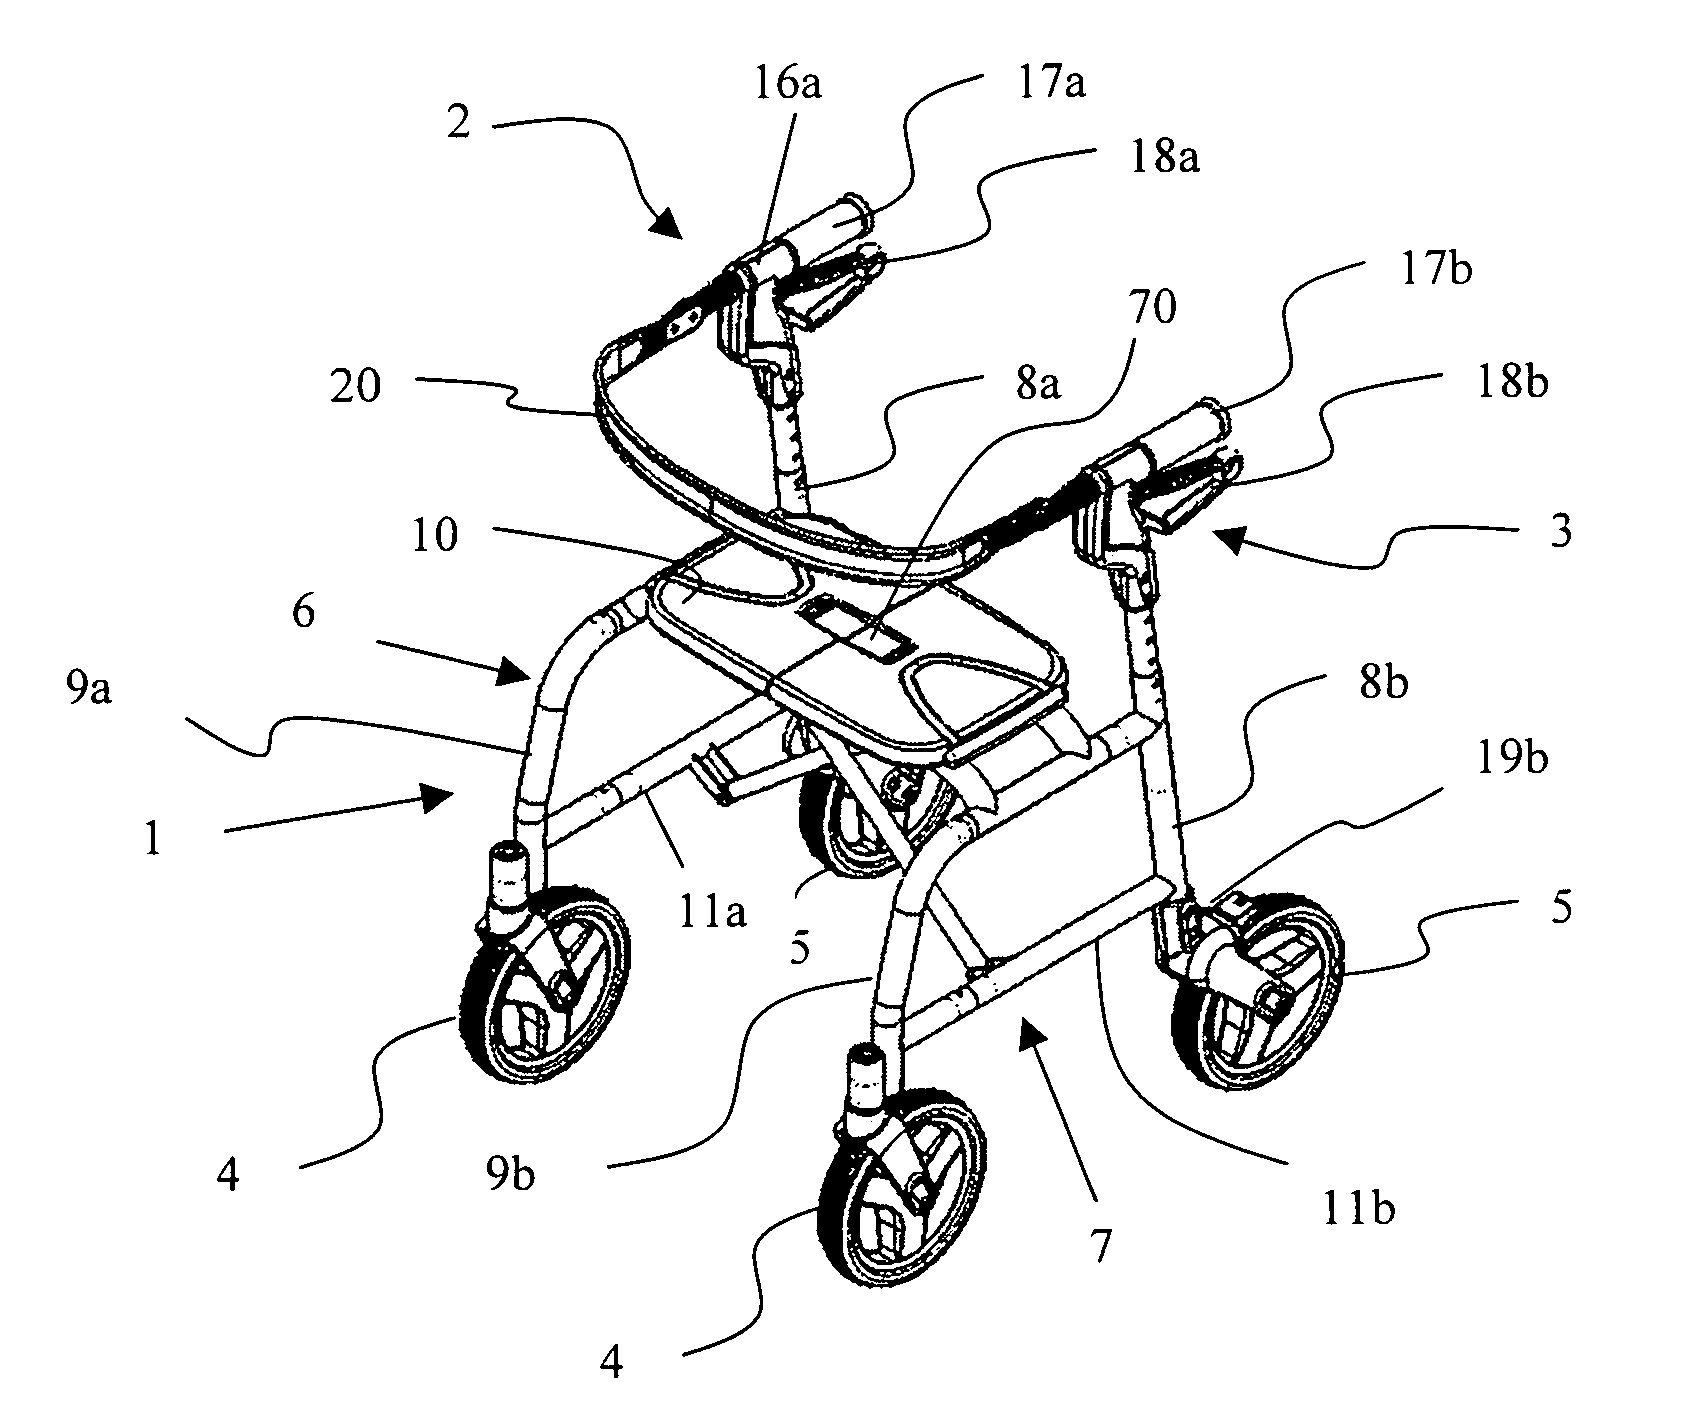 Mobility aiding device